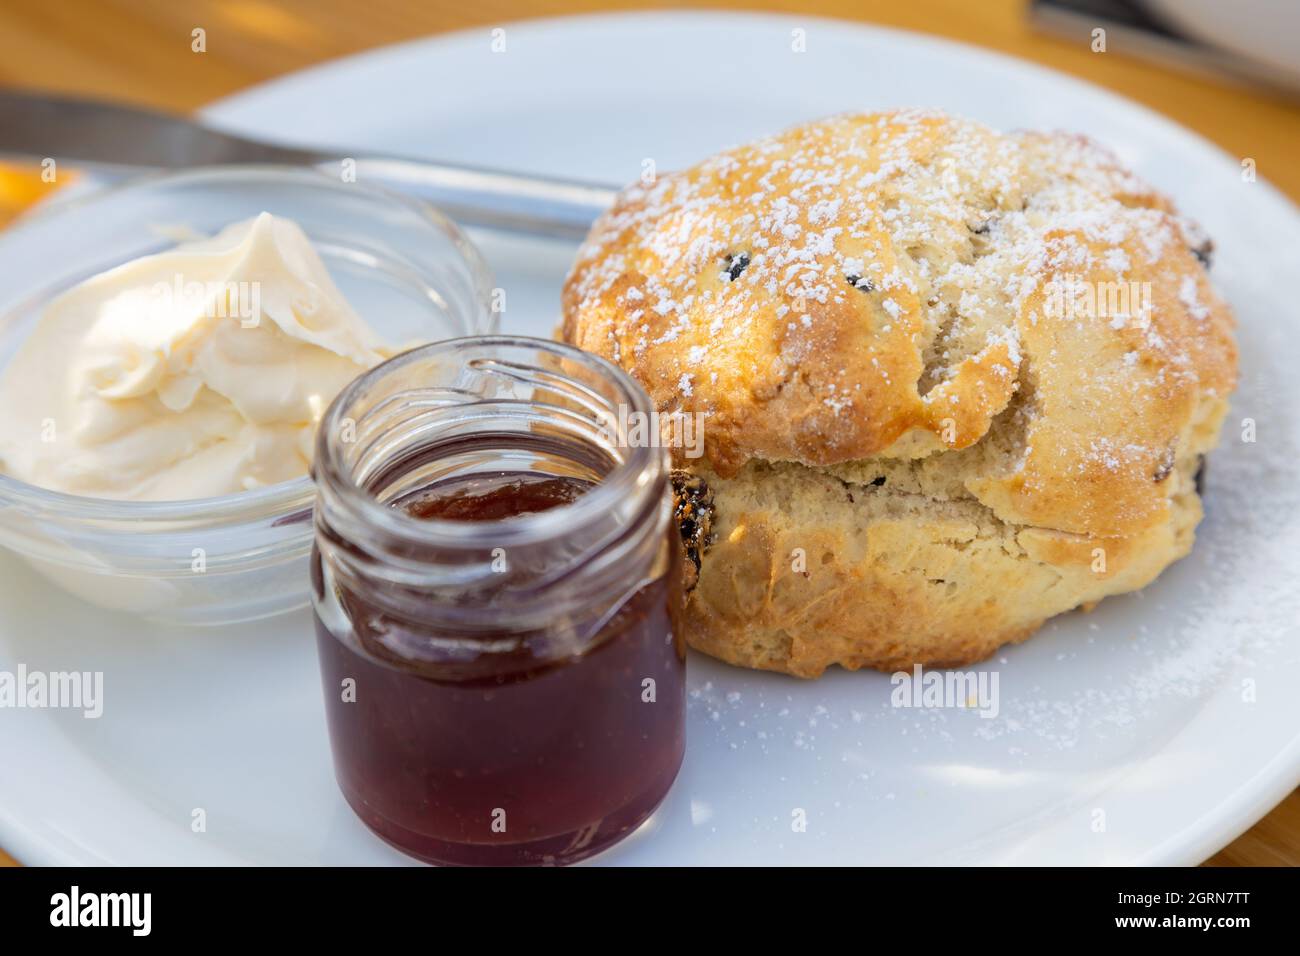 A Scone on a white plate with Jam and Cream on the side. Stock Photo